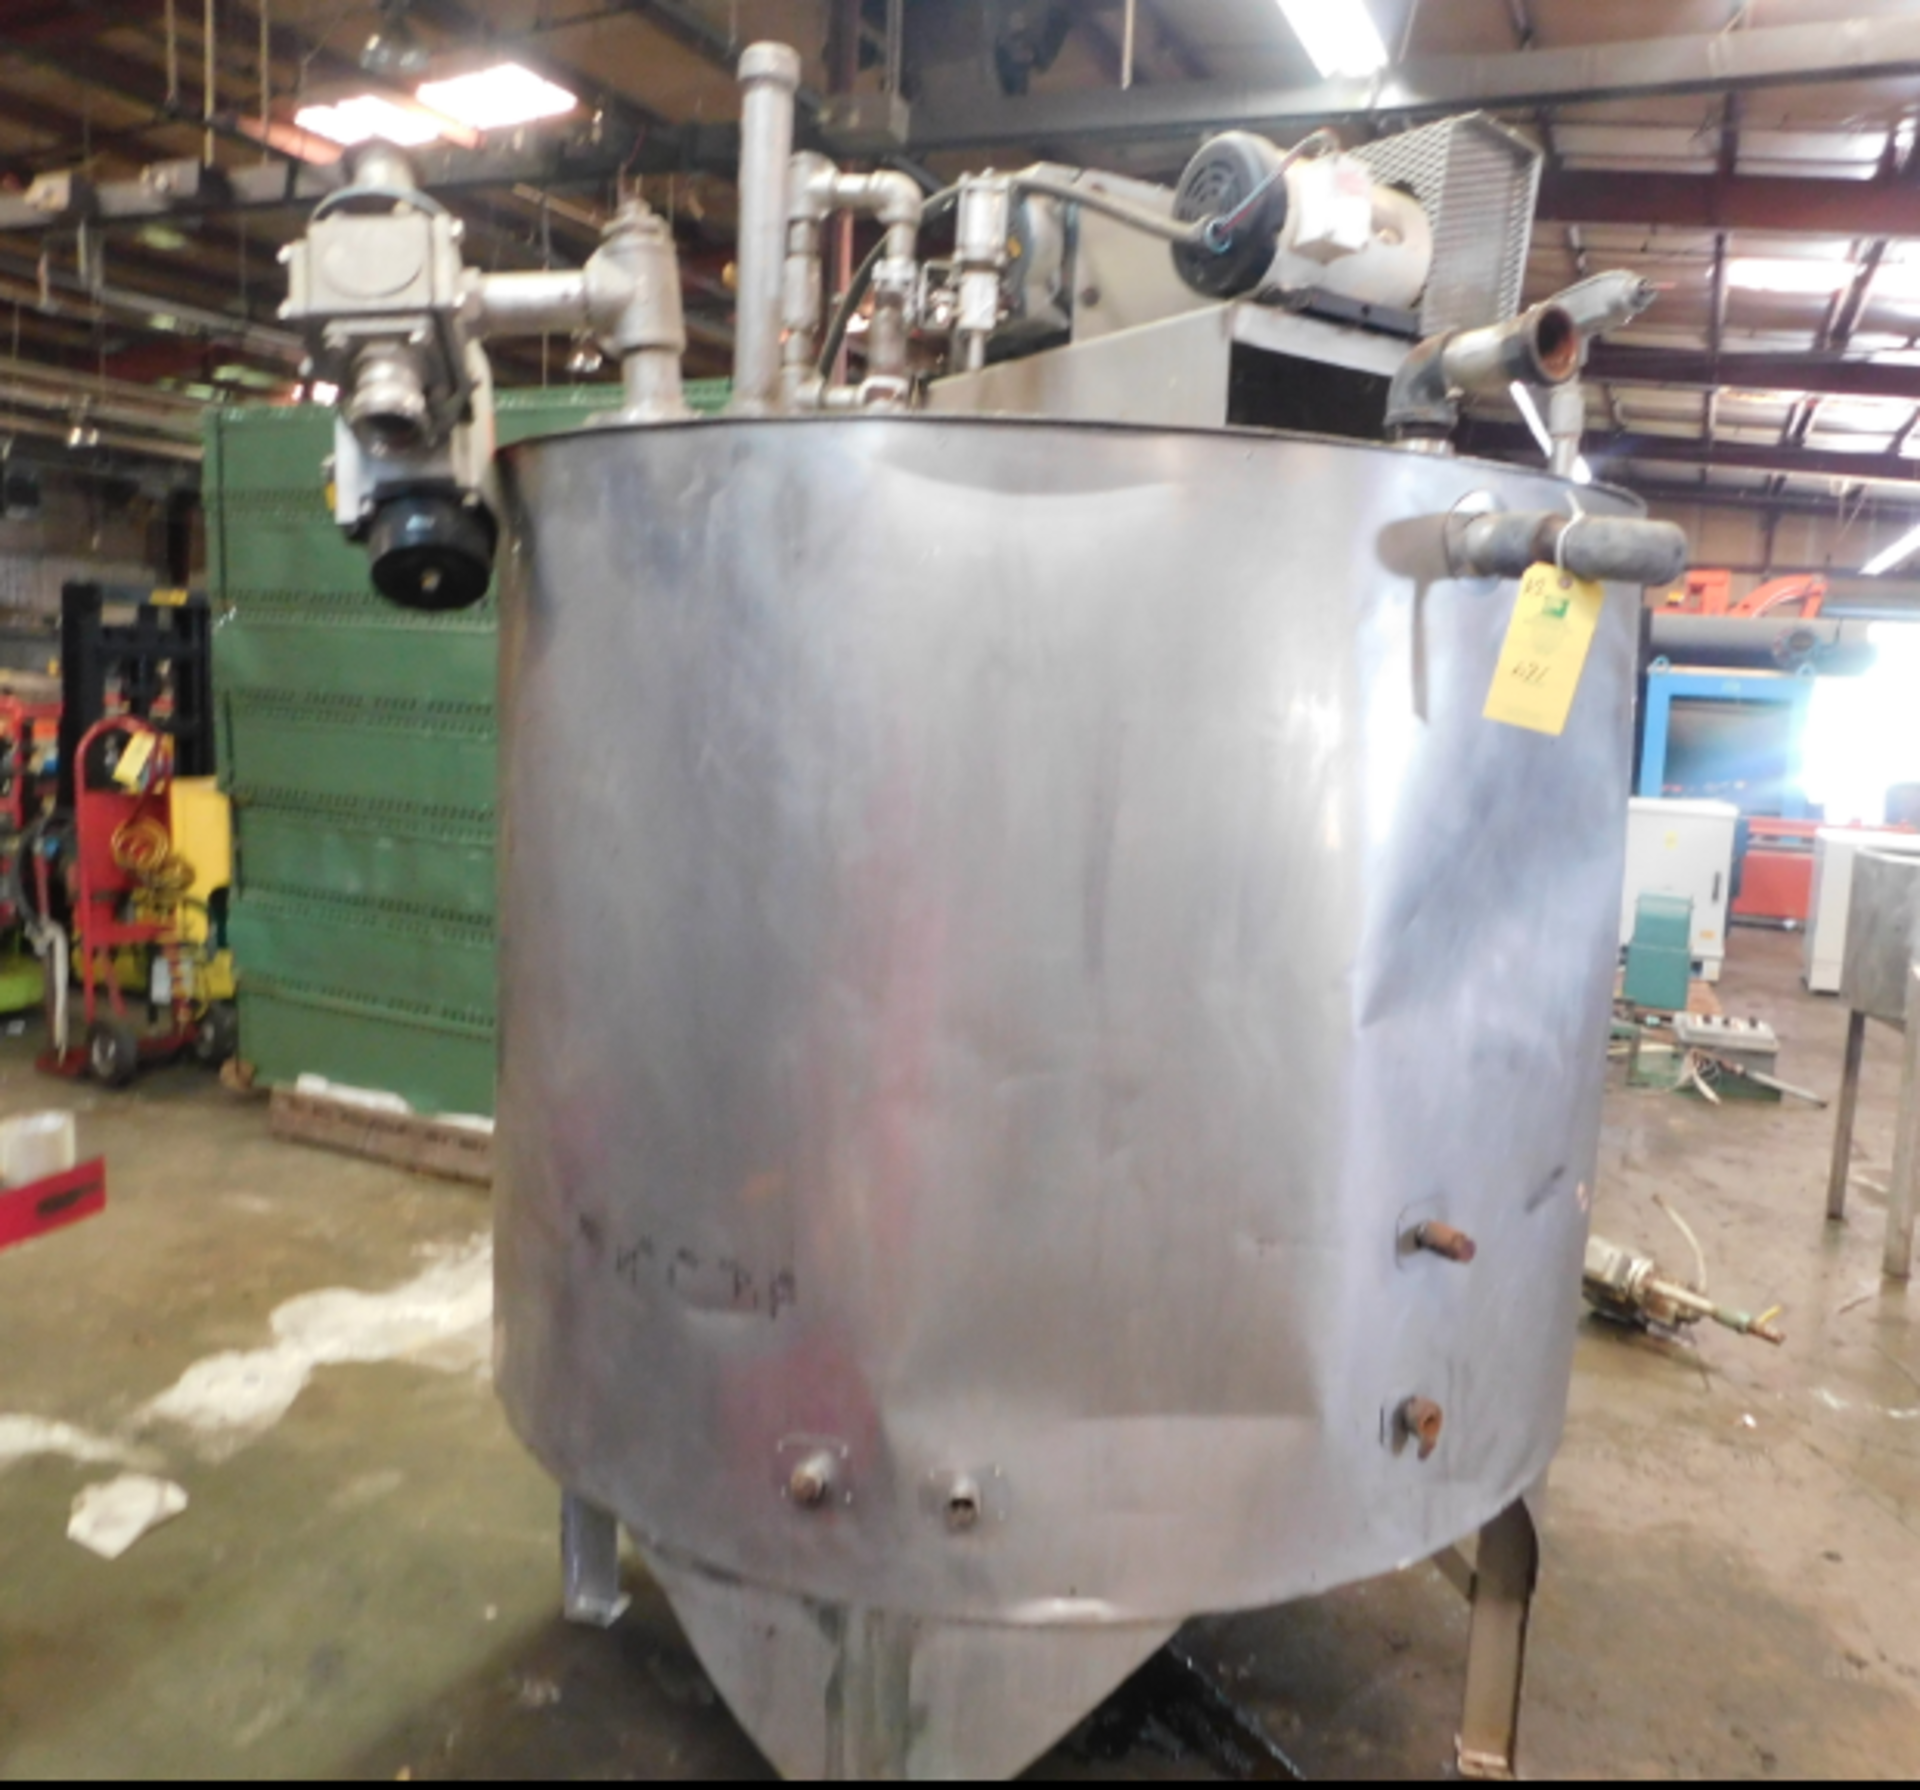 Stainless Steel Tank, 62 inches Diameter, 48.25 inches Height, Agitator/Mixer, Discharge Side and - Image 3 of 3